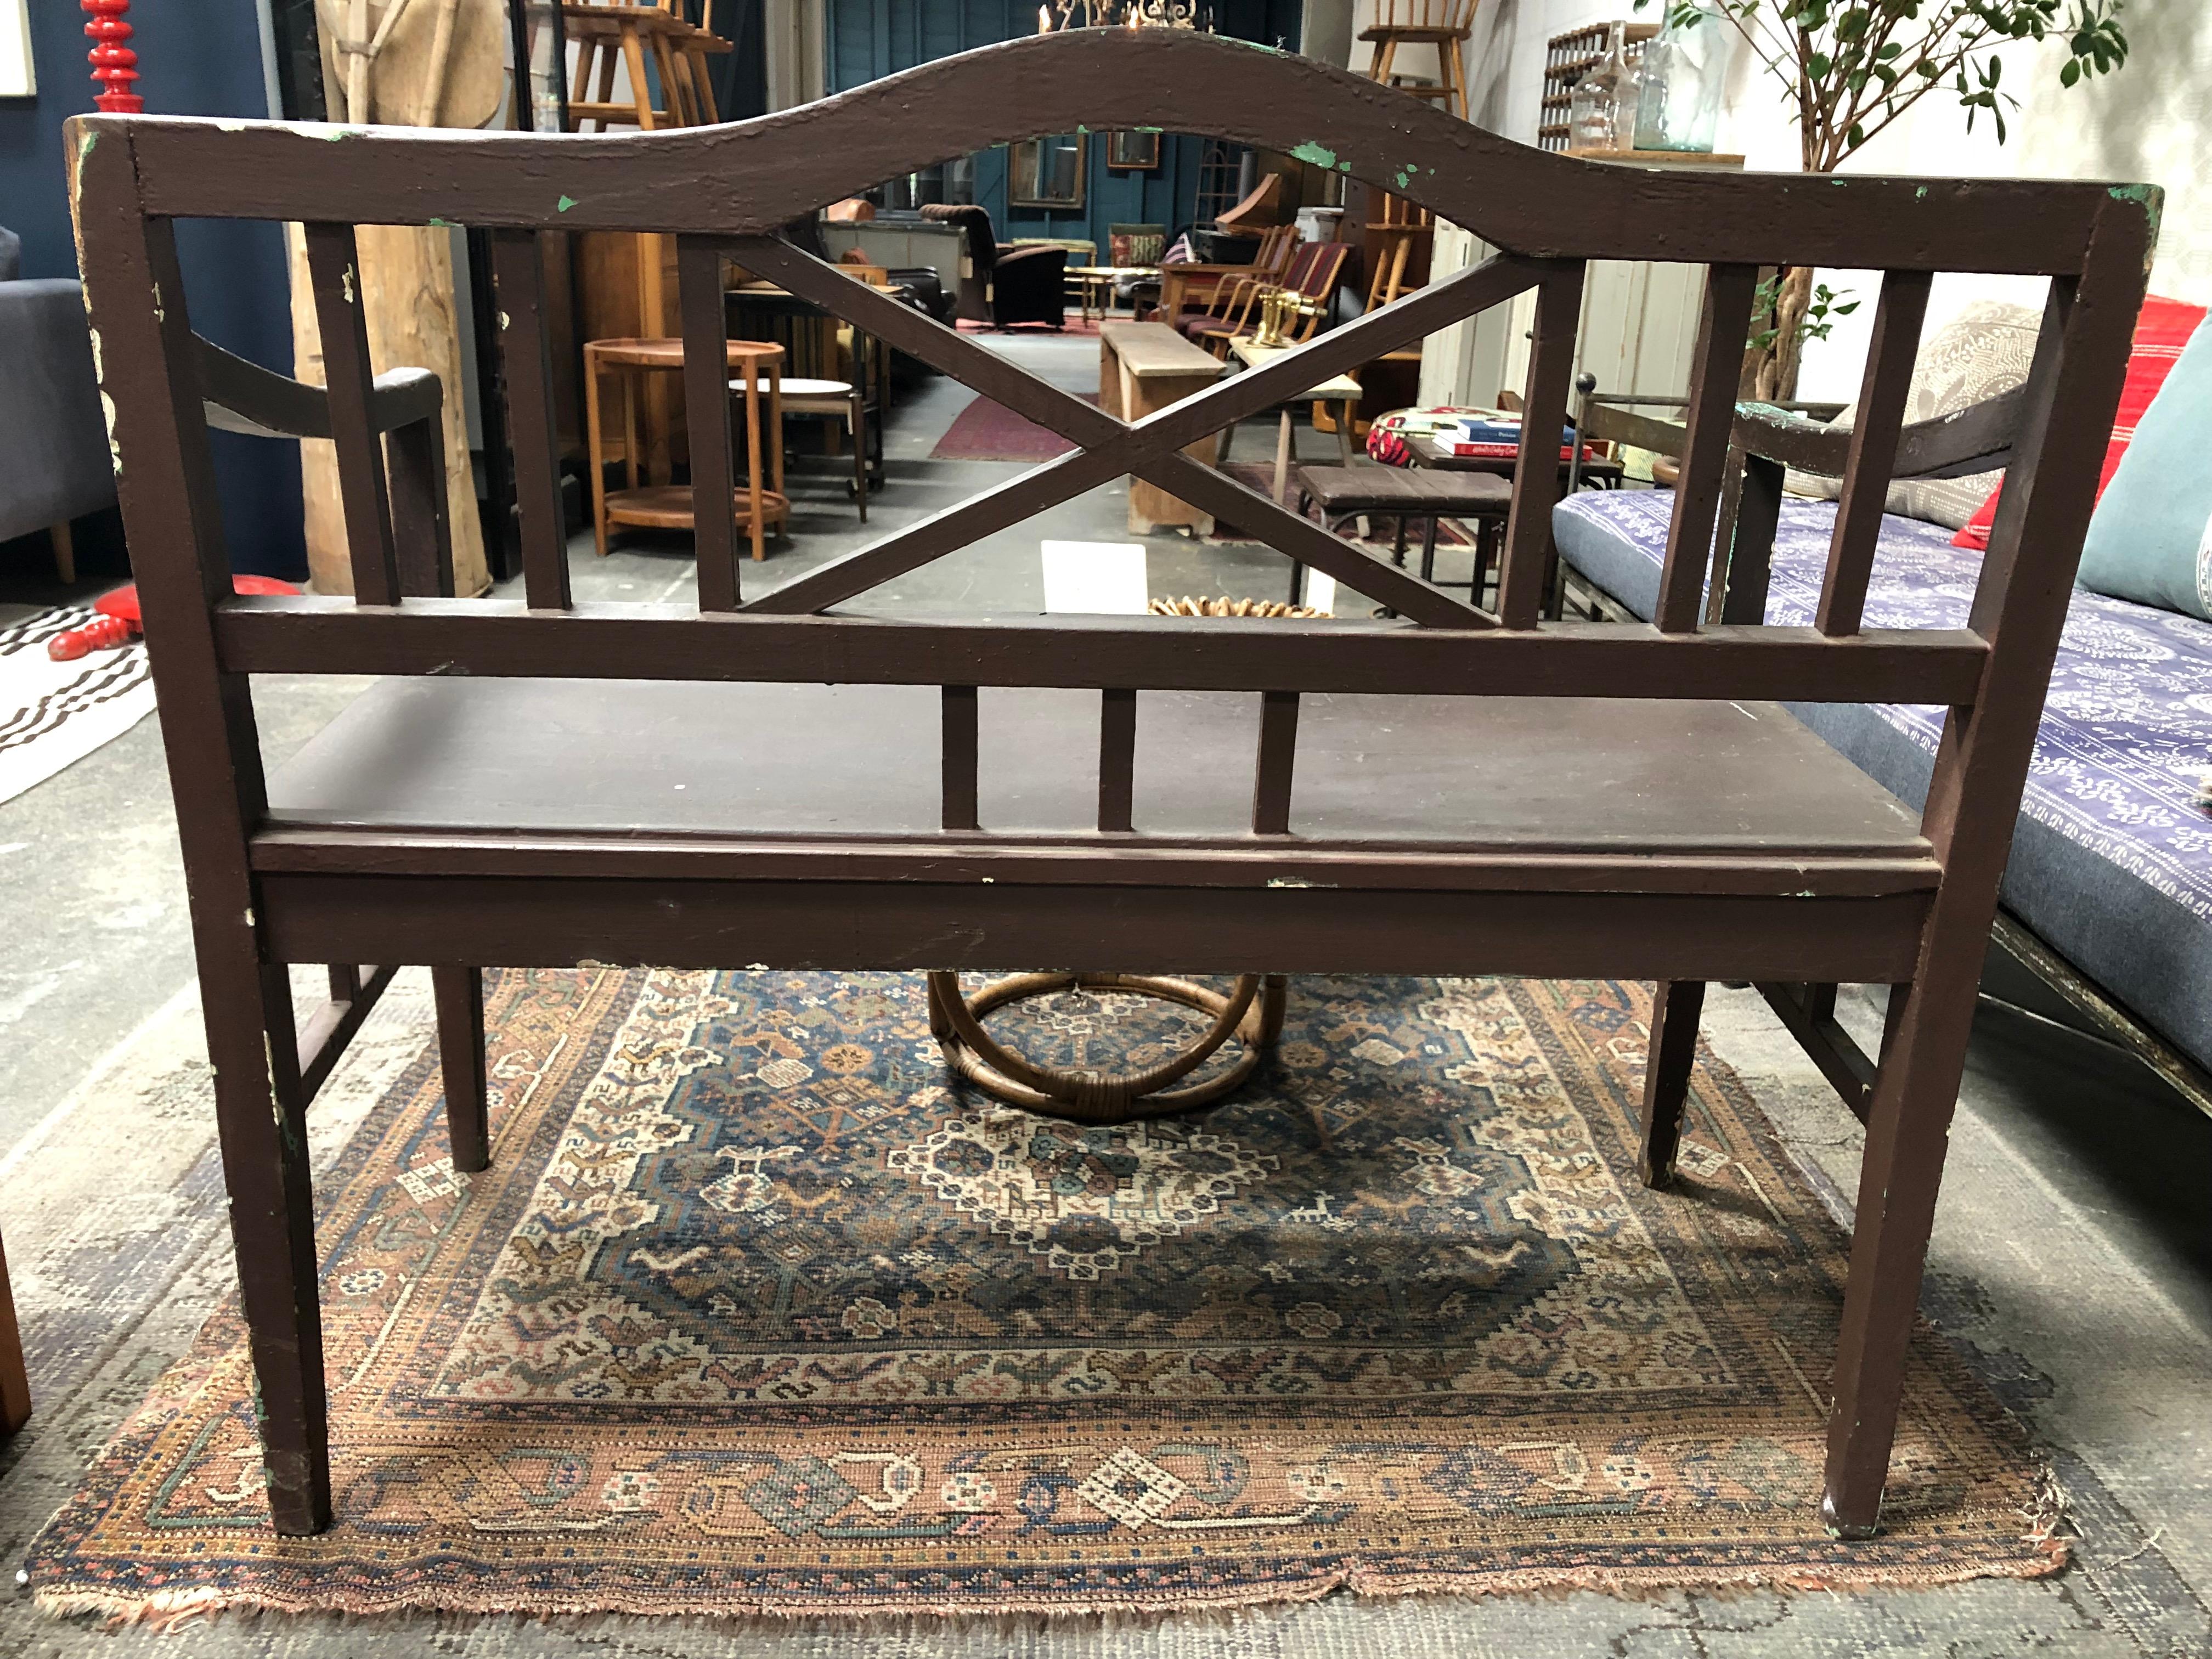 Float away to a secret garden in our midcentury wooden garden bench. Sturdily built in a delicious and rustic brown paint, brighten this piece with outdoor pillows or a long seat cushion for lounging.

Measures: Seat height 19.5